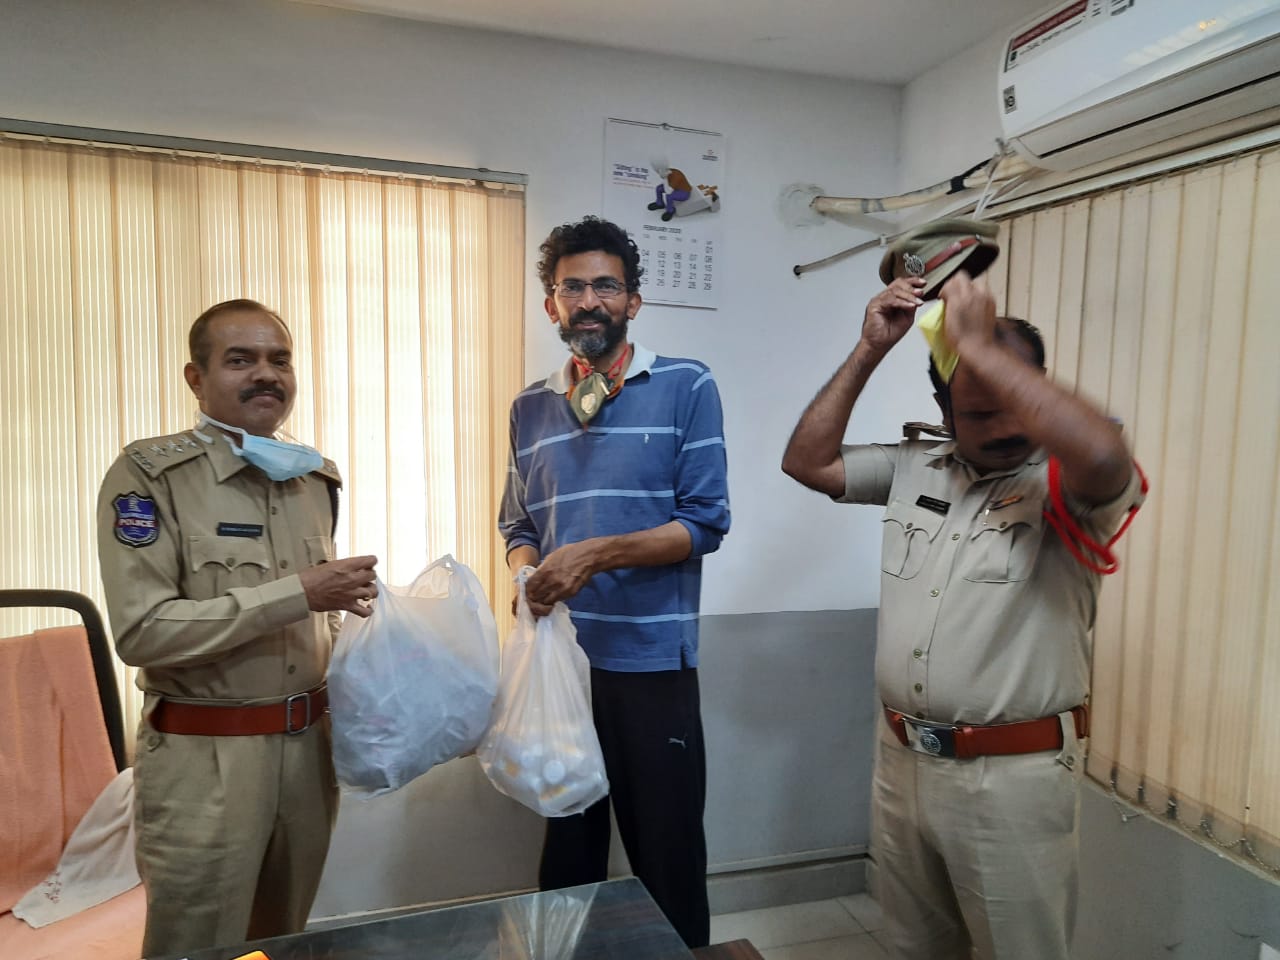 Director Sekhar Kammula provides refreshment for Sanitation Workers In Hyderabad and Karnool town